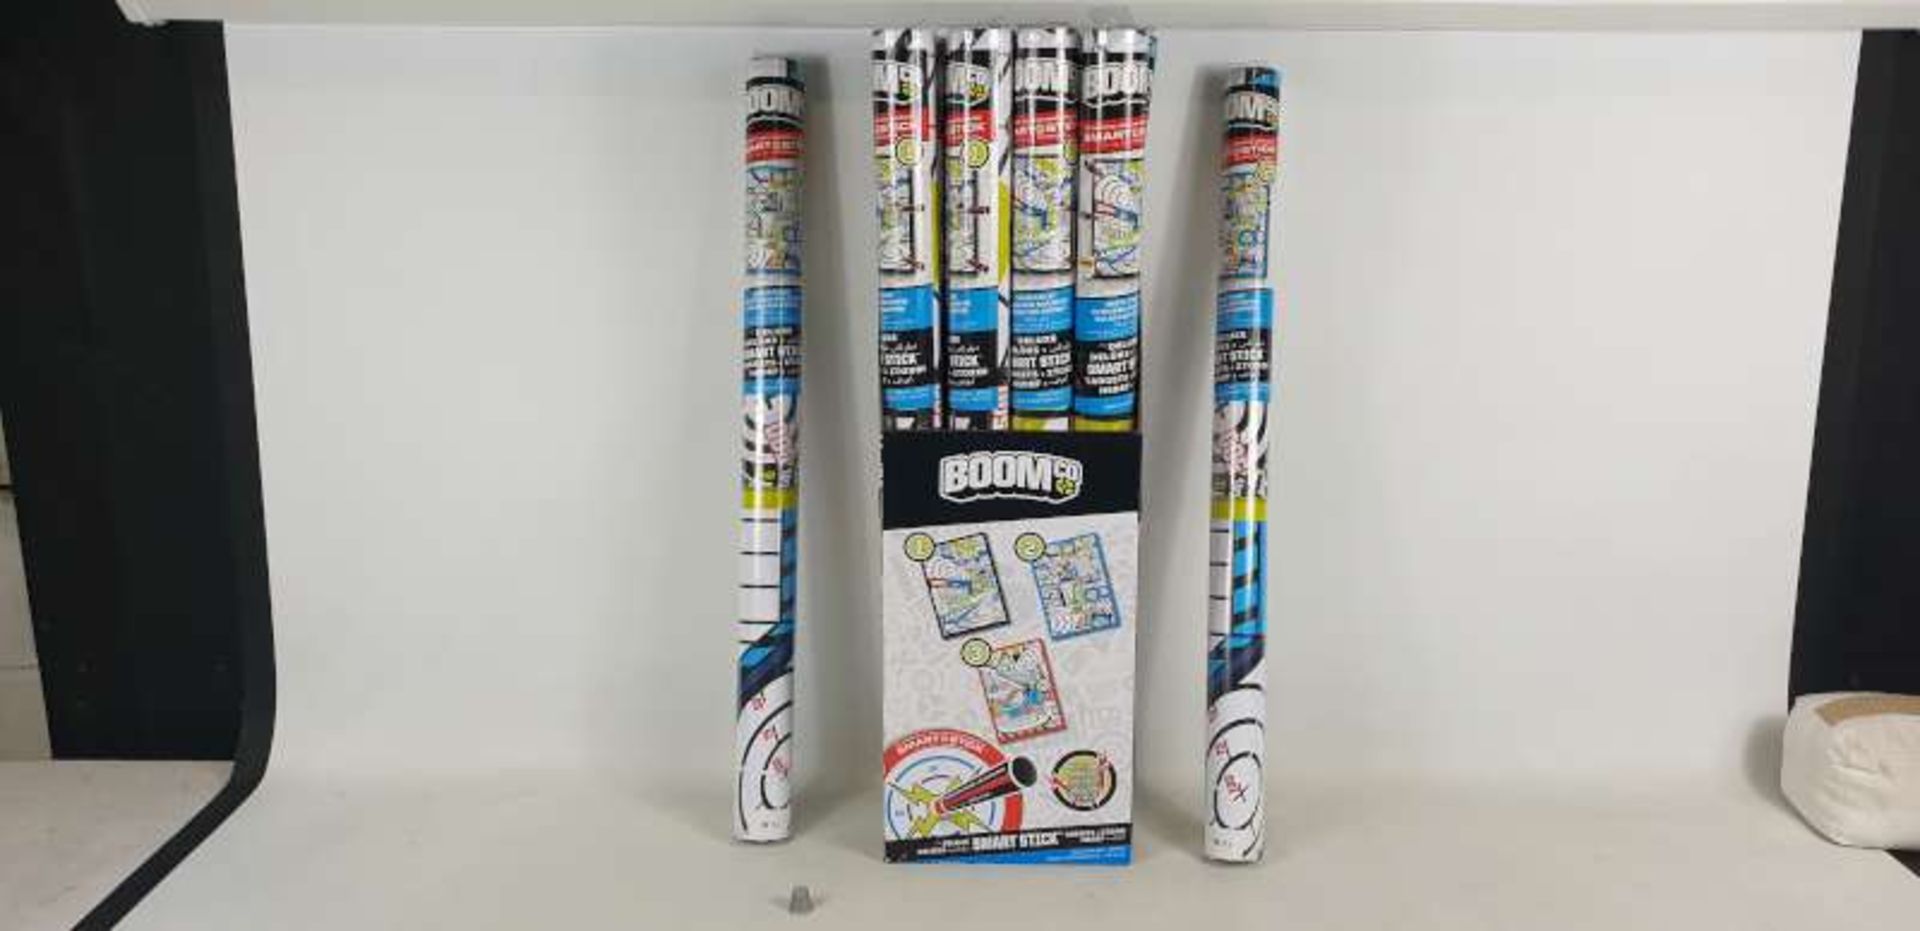 60 BOOMCO DELUXE SMART STICK TARGETS IN 5 BOXES